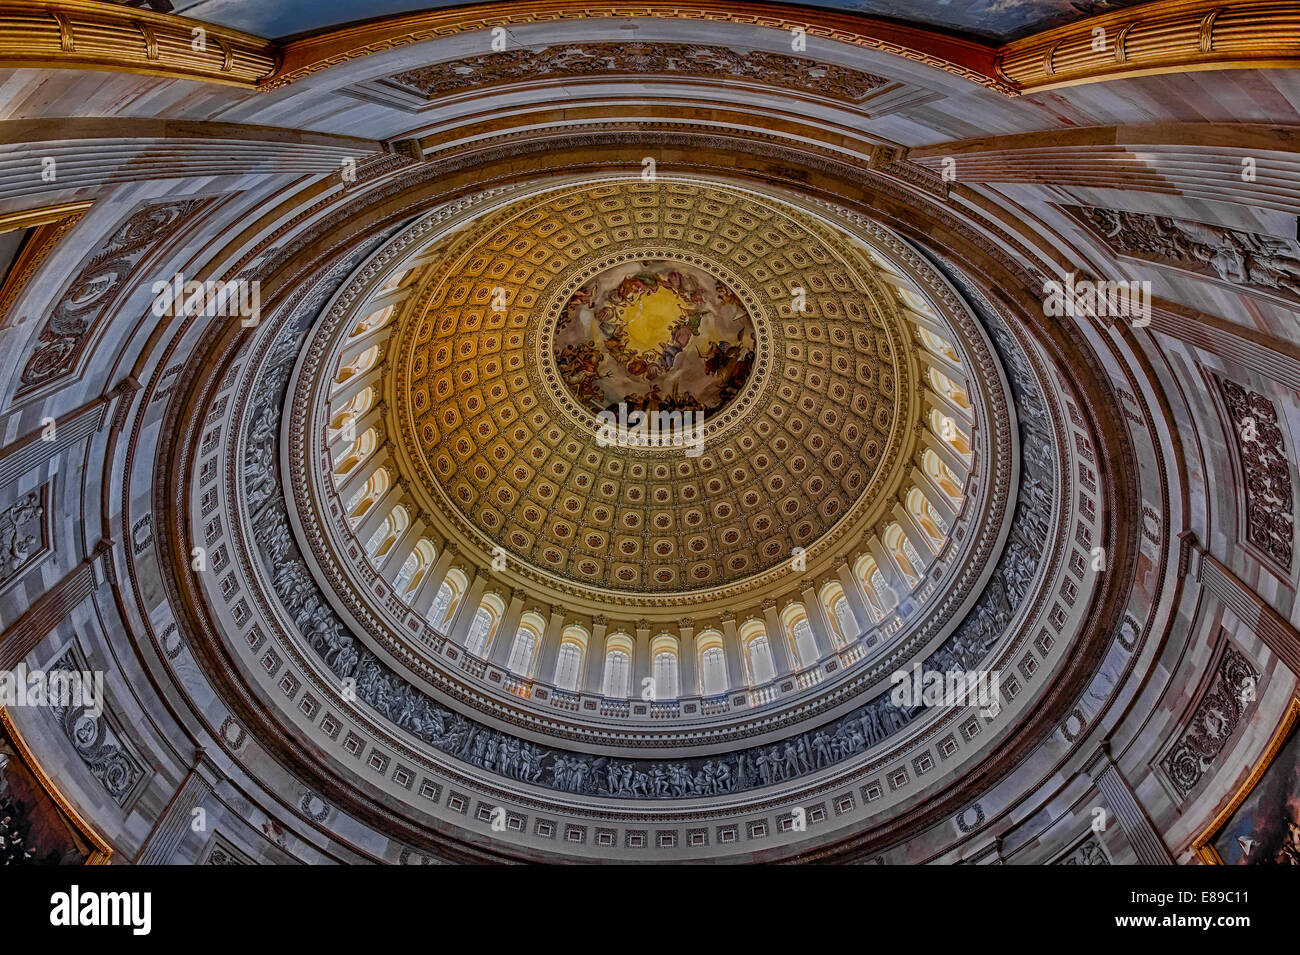 An interior view to the rotunda of the US Capitol. The rotunda is located below the Capitol dome. It's neoclassical architecture style makes the rotunda very impresive. Stock Photo